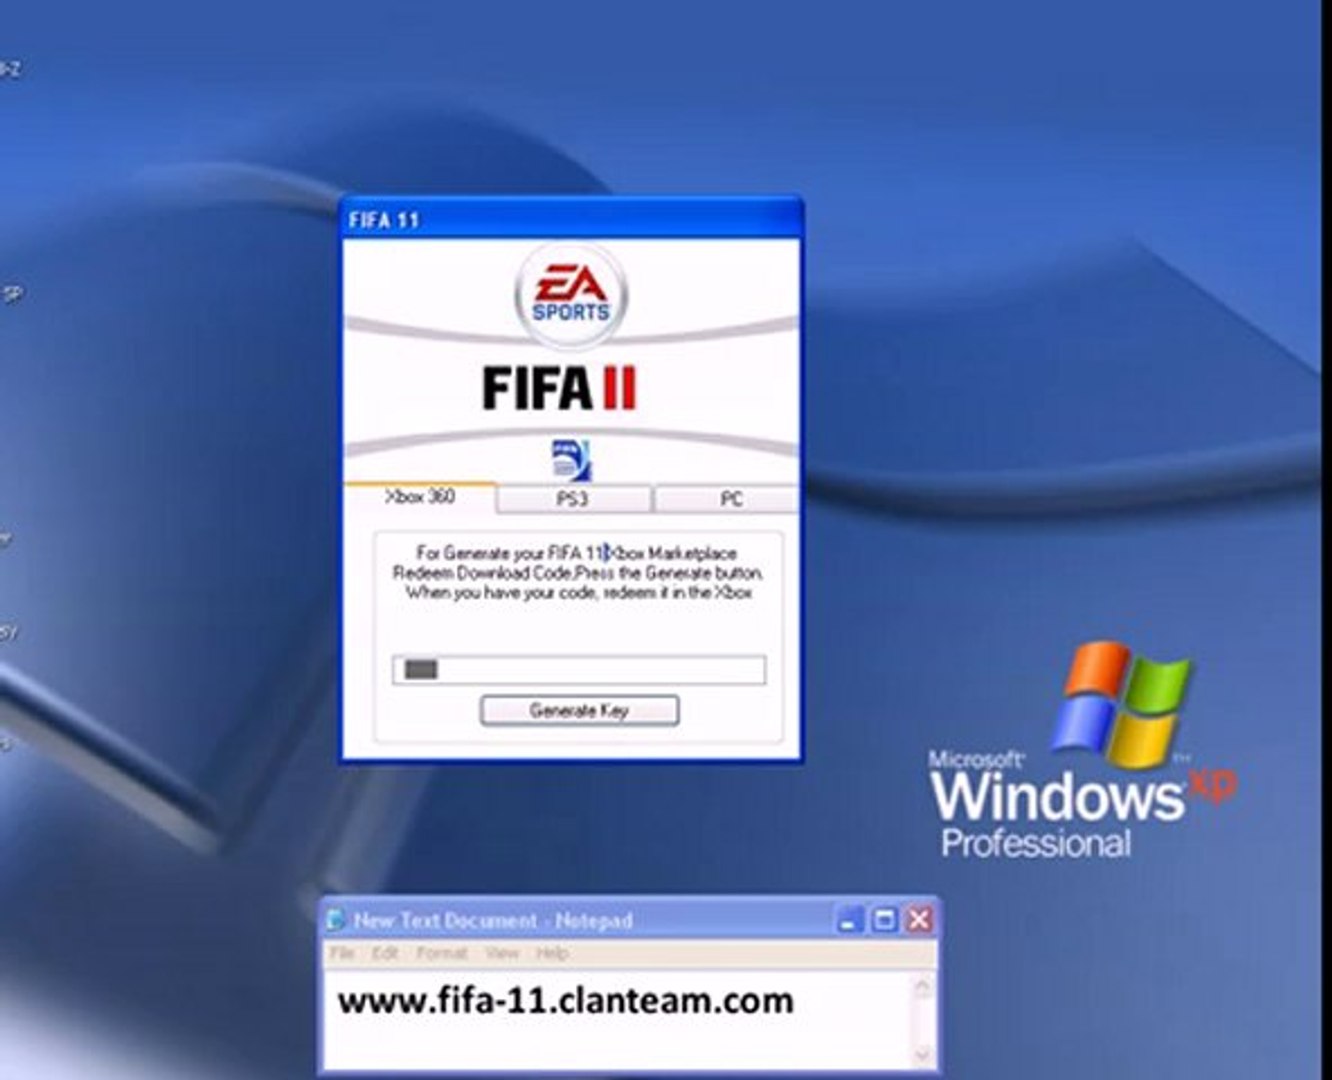 Fifa 11 Redemption October 2010 Codes for PS3 and Xbox 360 - video  Dailymotion